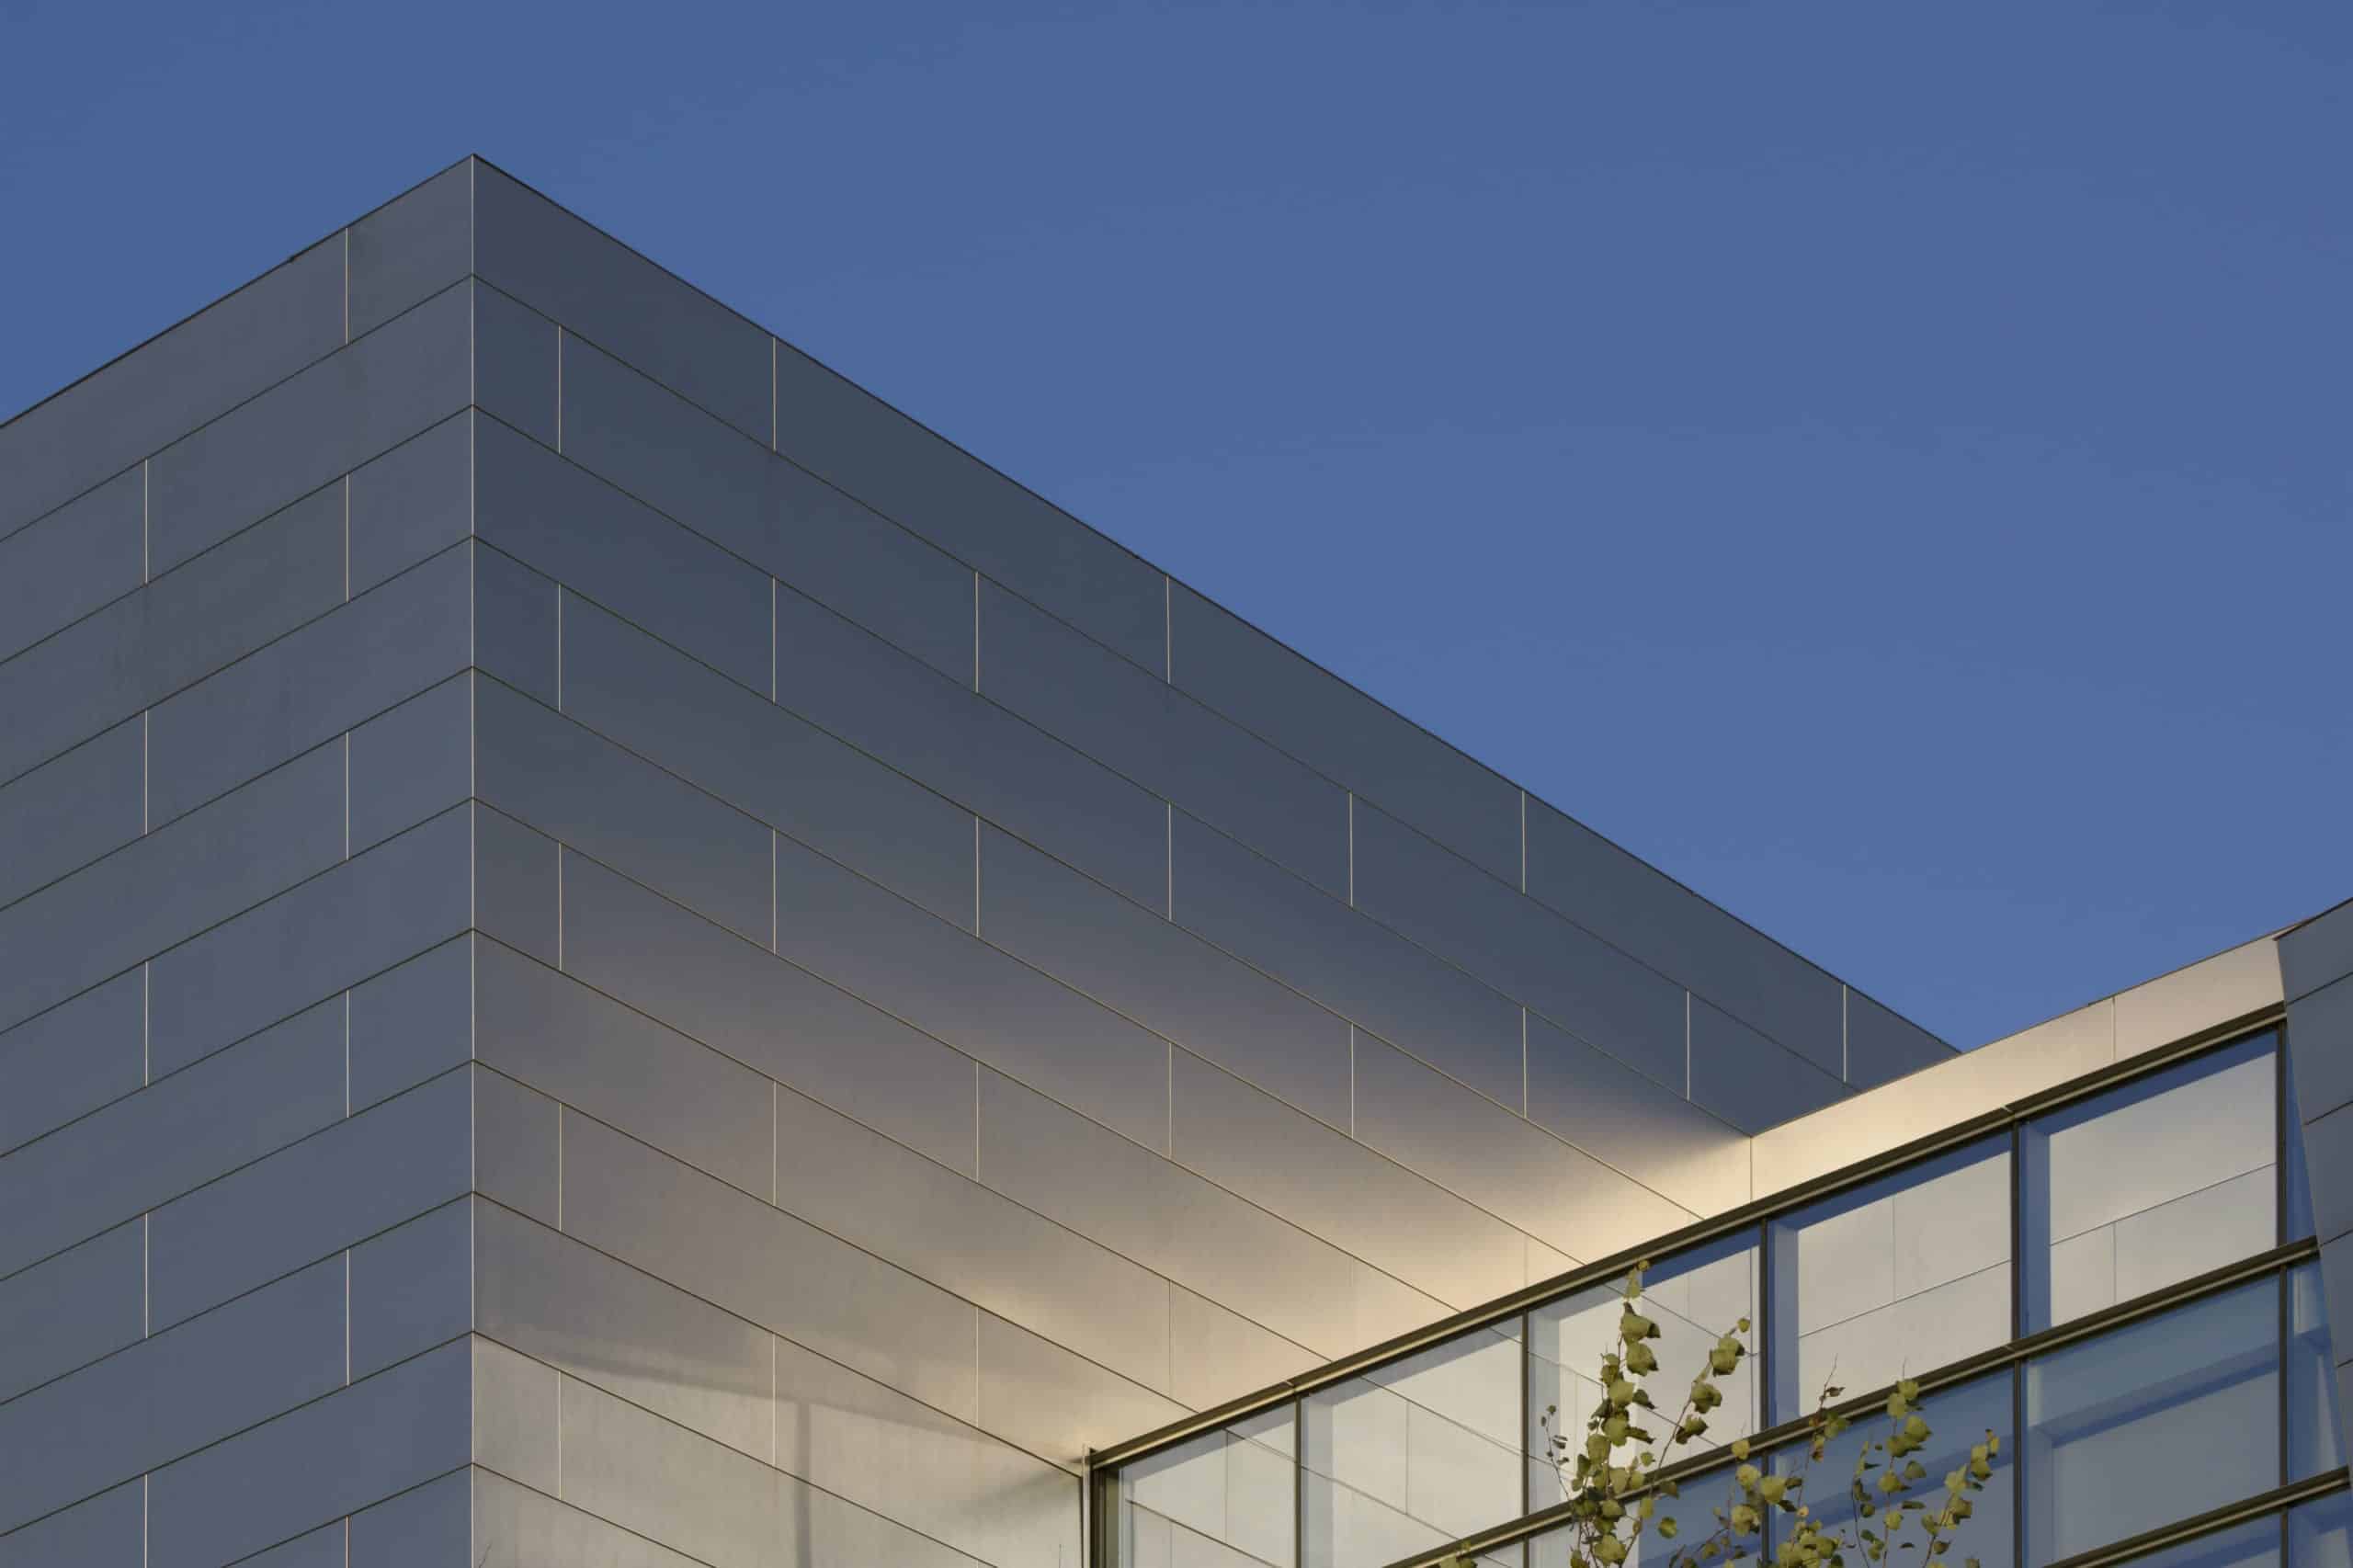 Detail of the stainless steel facade for Eugene Federal Courthouse.